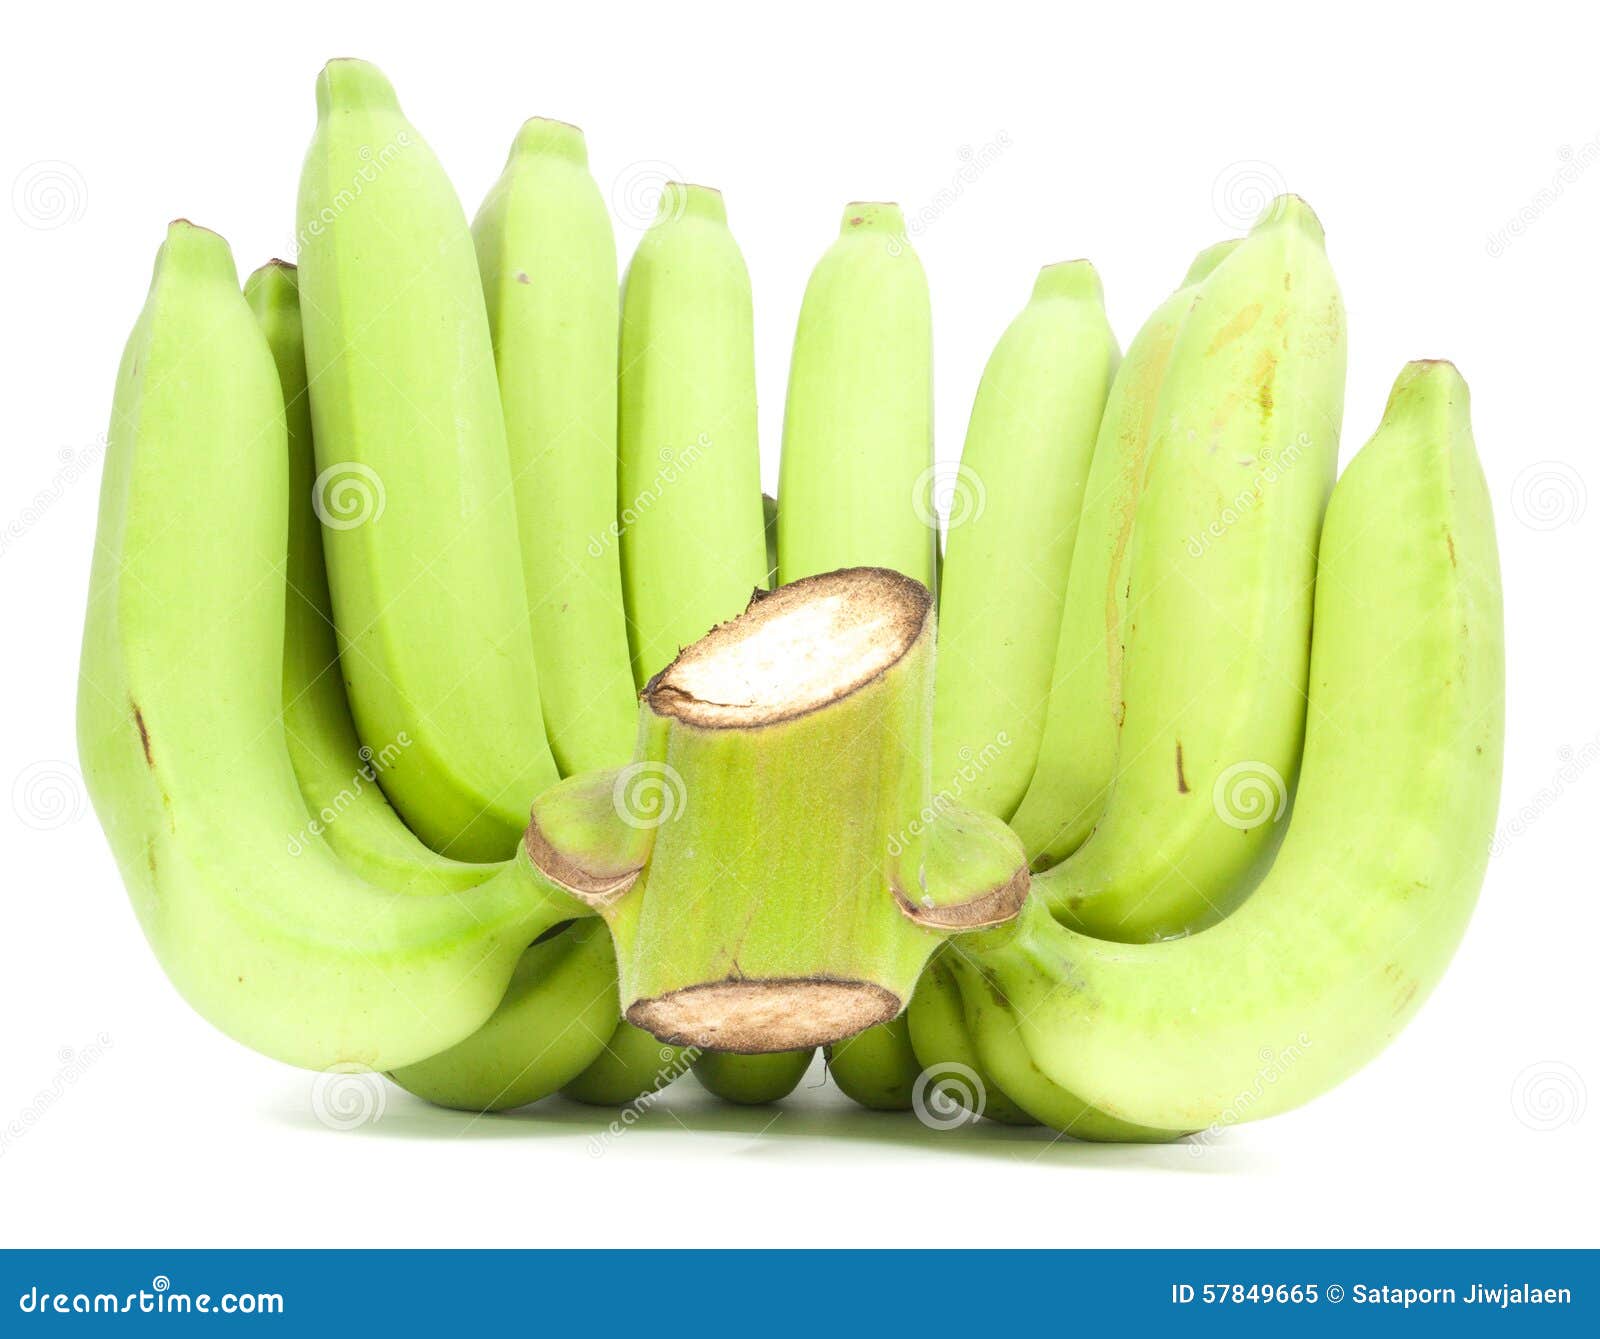 Bunch Of Green Bananas Stock Image Image Of Object Closeup 57849665